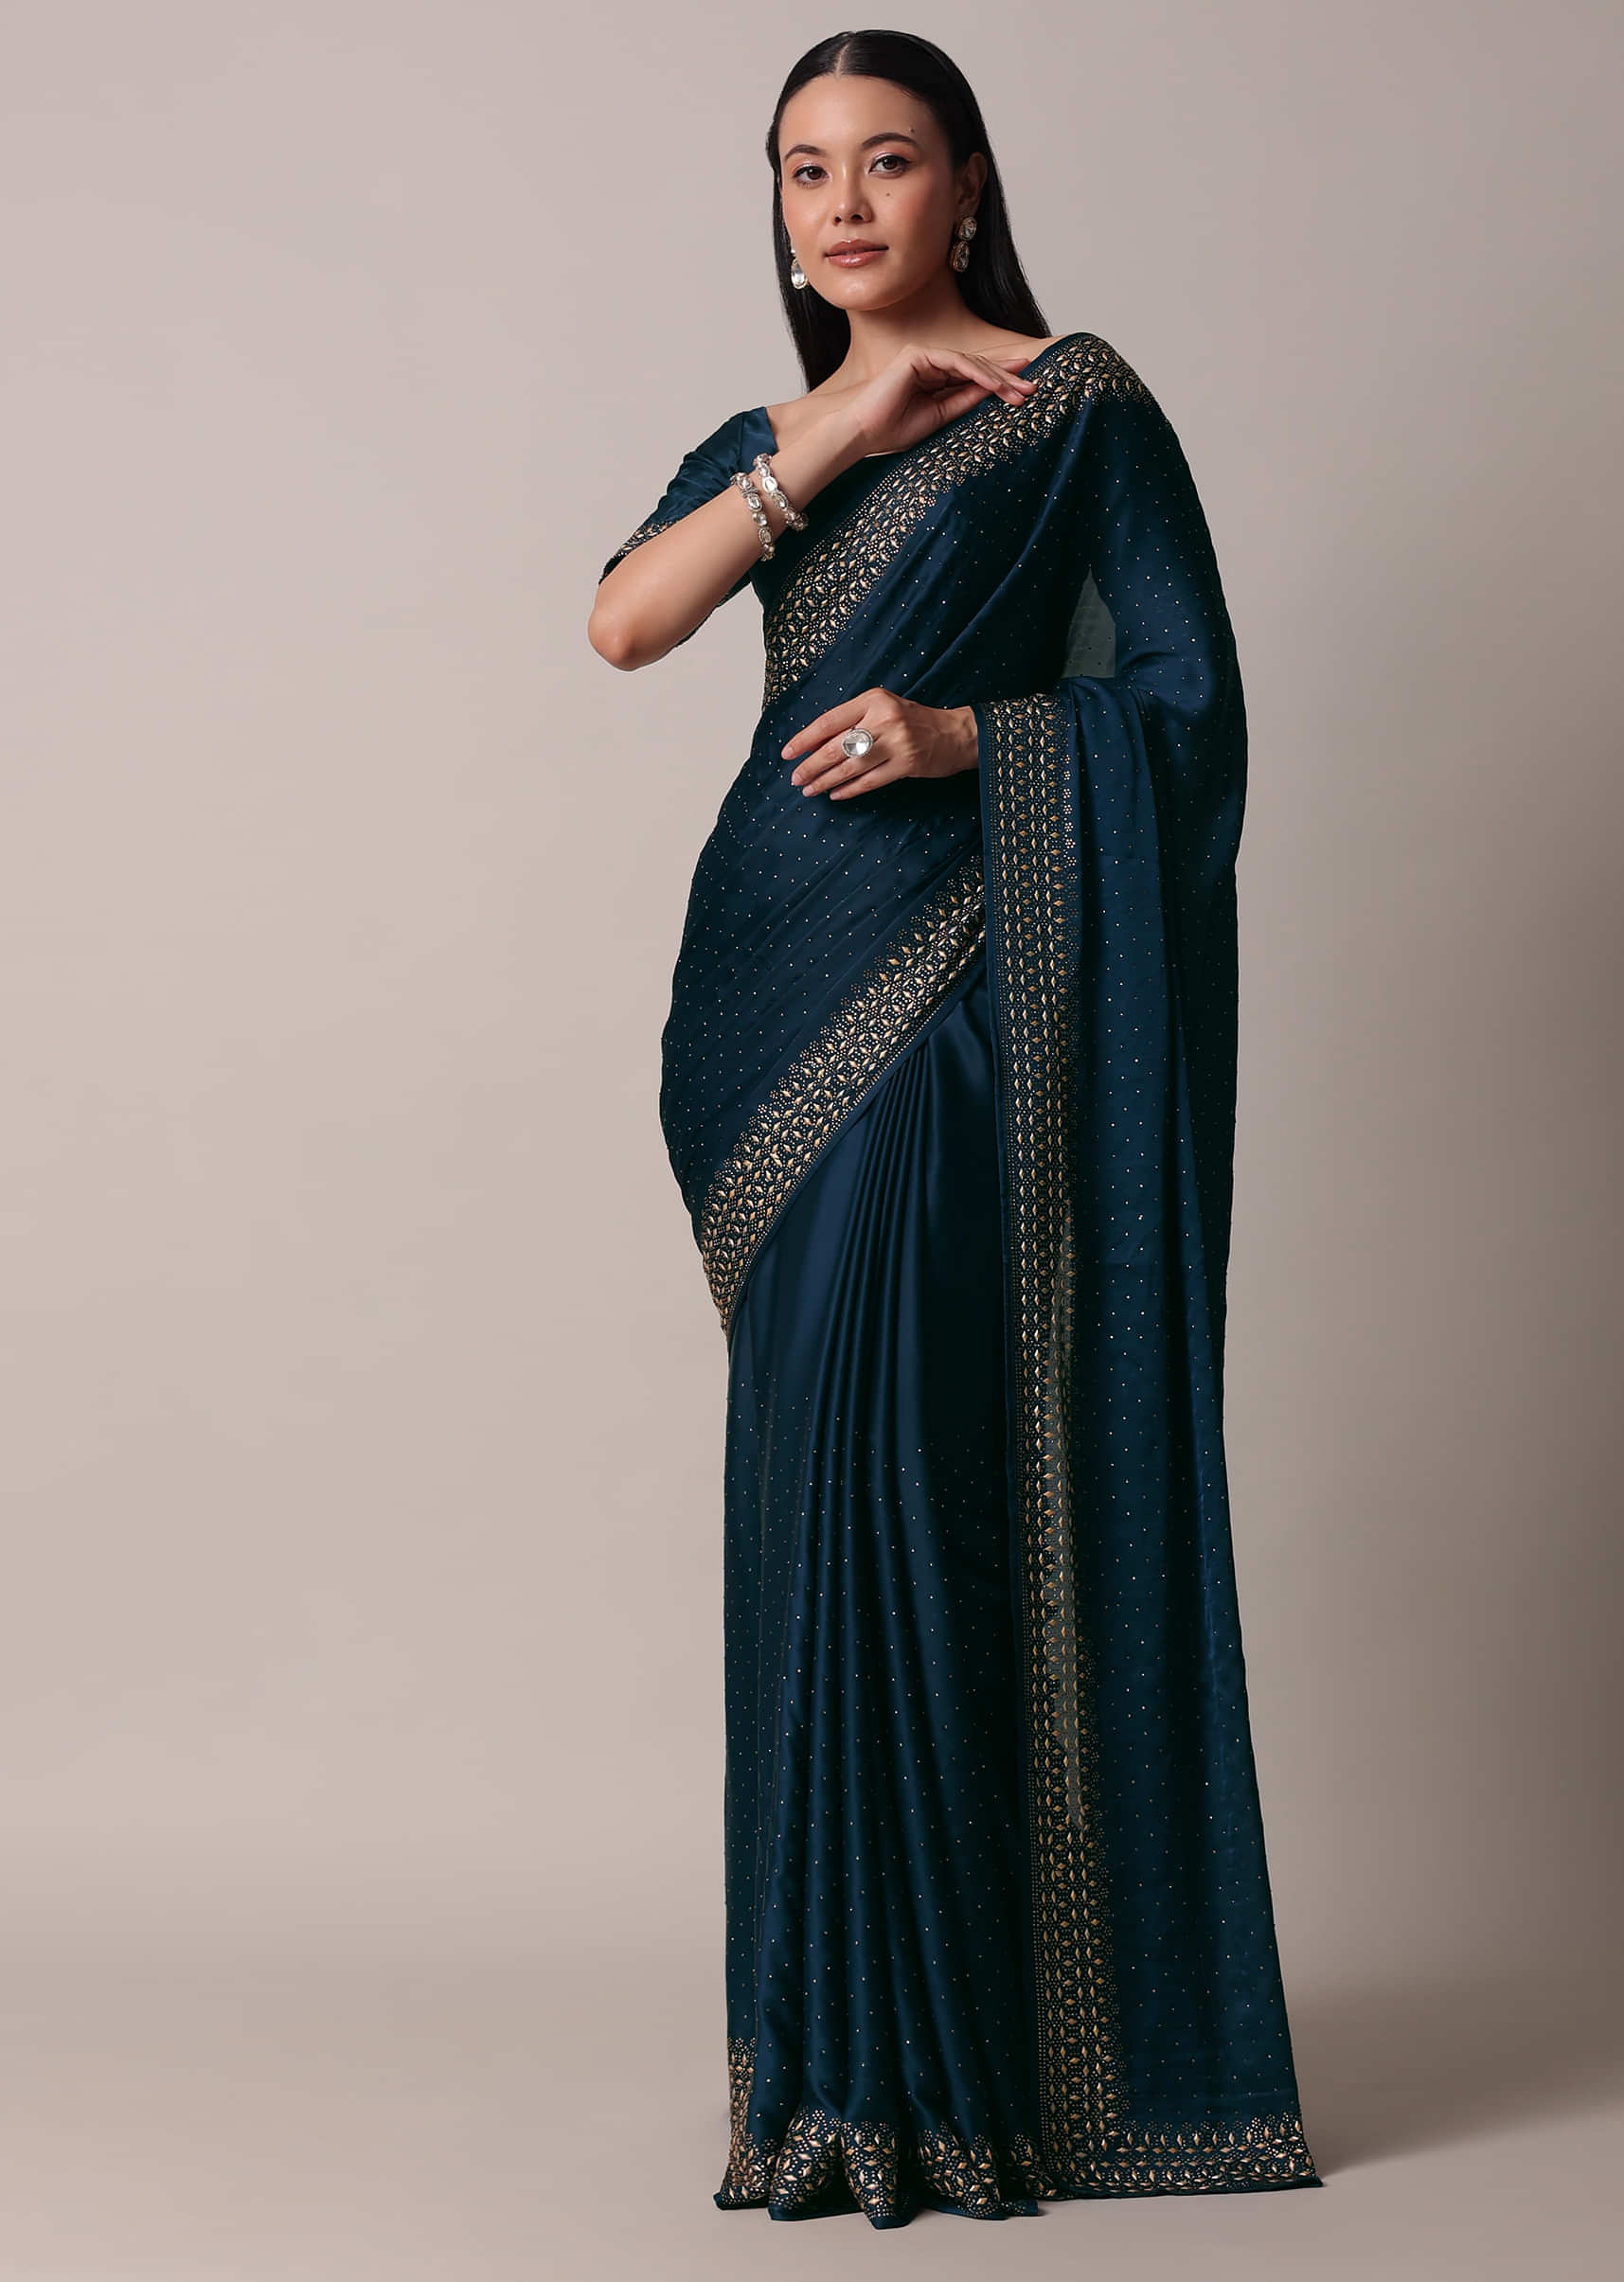 https://newcdn.kalkifashion.com/media/catalog/product/p/e/peacock_blue_saree_in_satin_with_embellishments_and_unstitched_blo-sg199280_8_.jpg